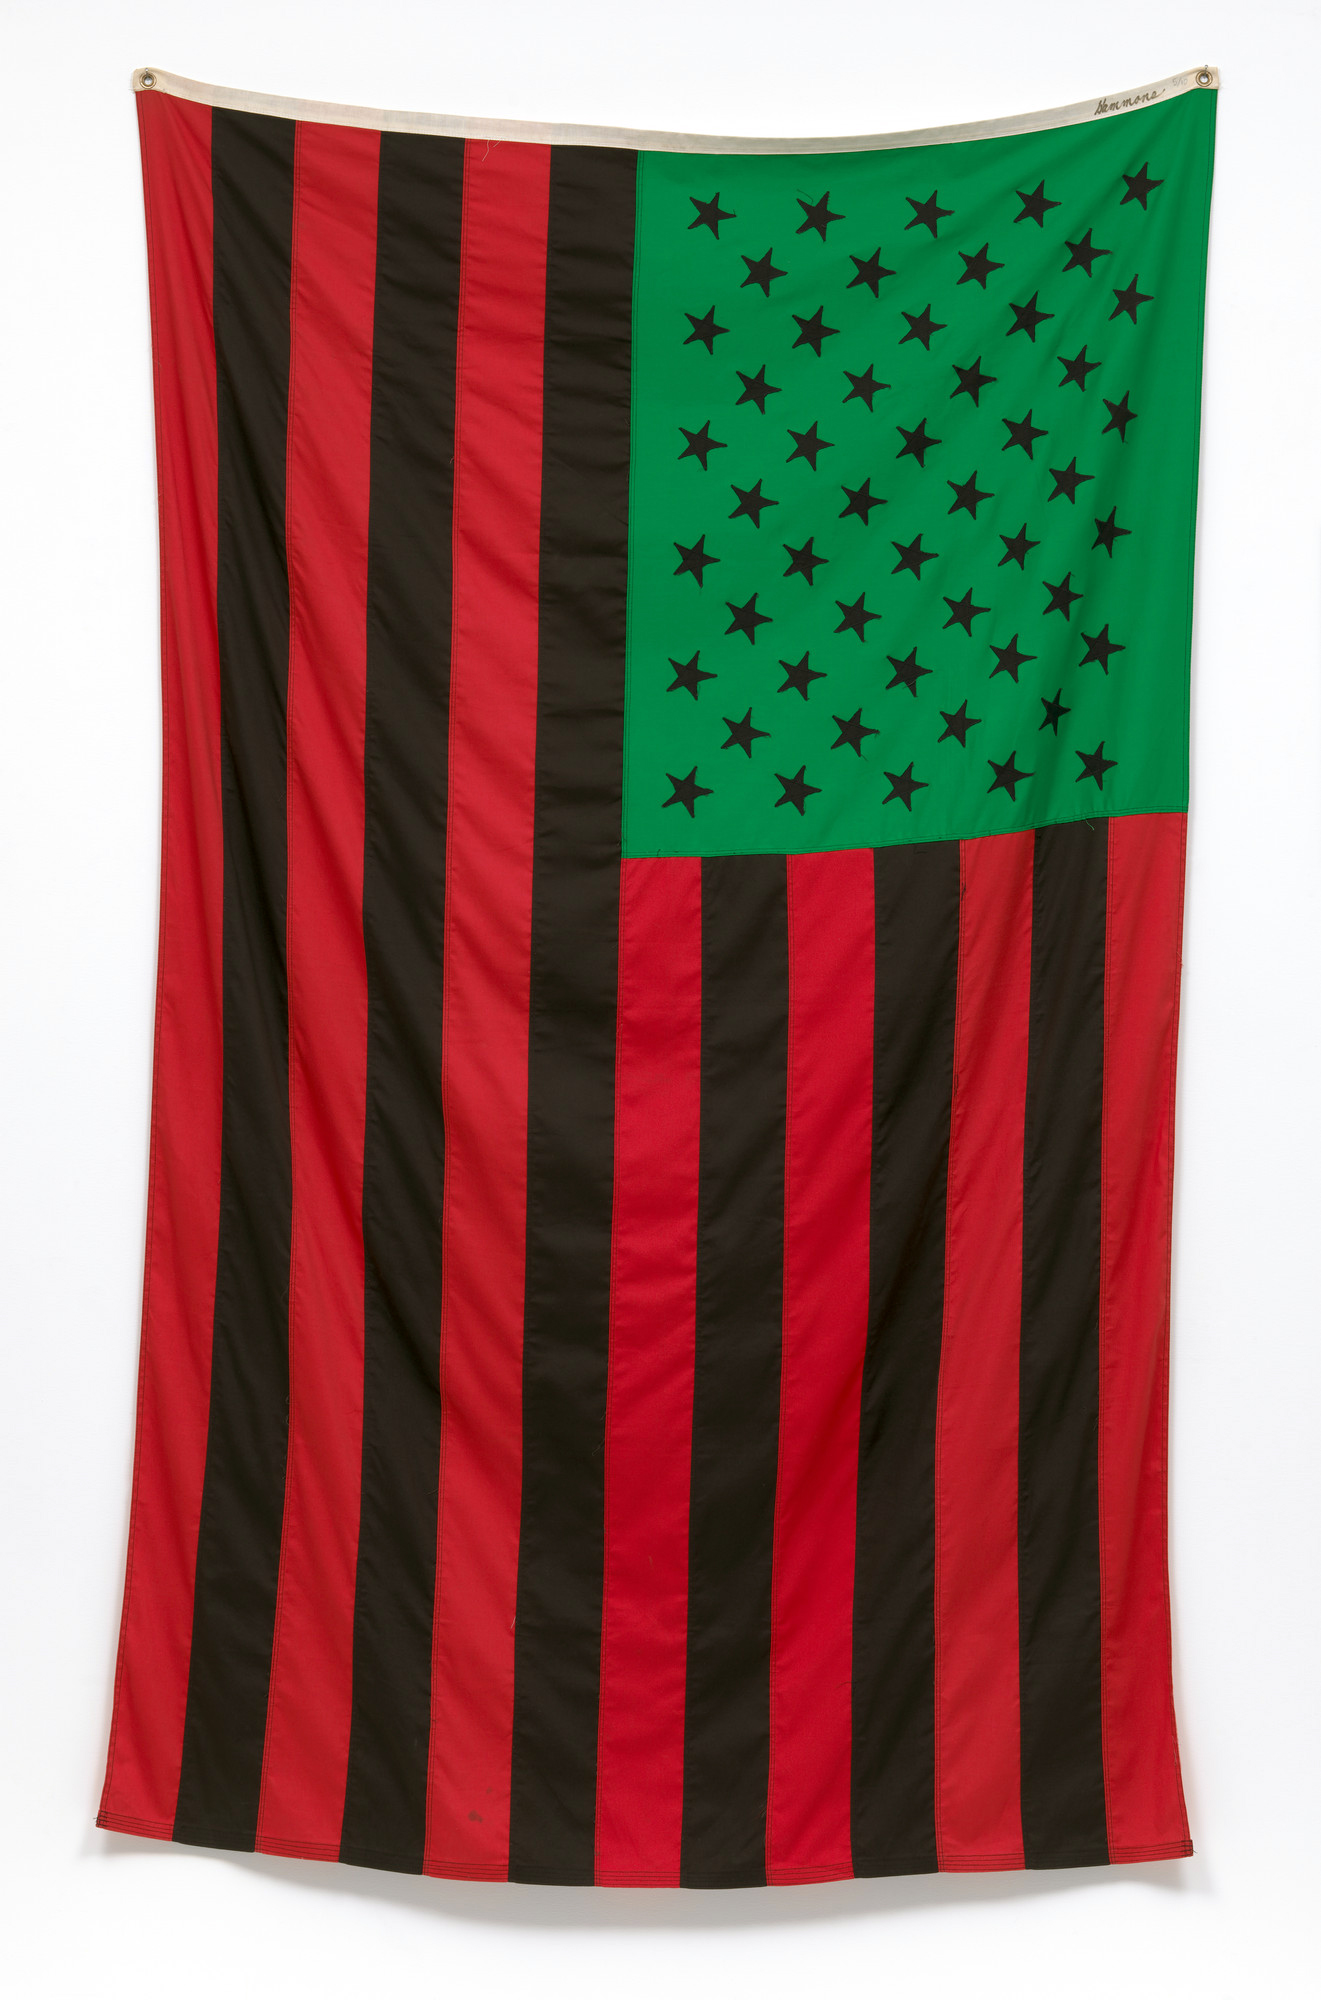 David Hammons, African American Flag, 1990, canvas and grommets, 149.9 × 240 cm (MoMA)